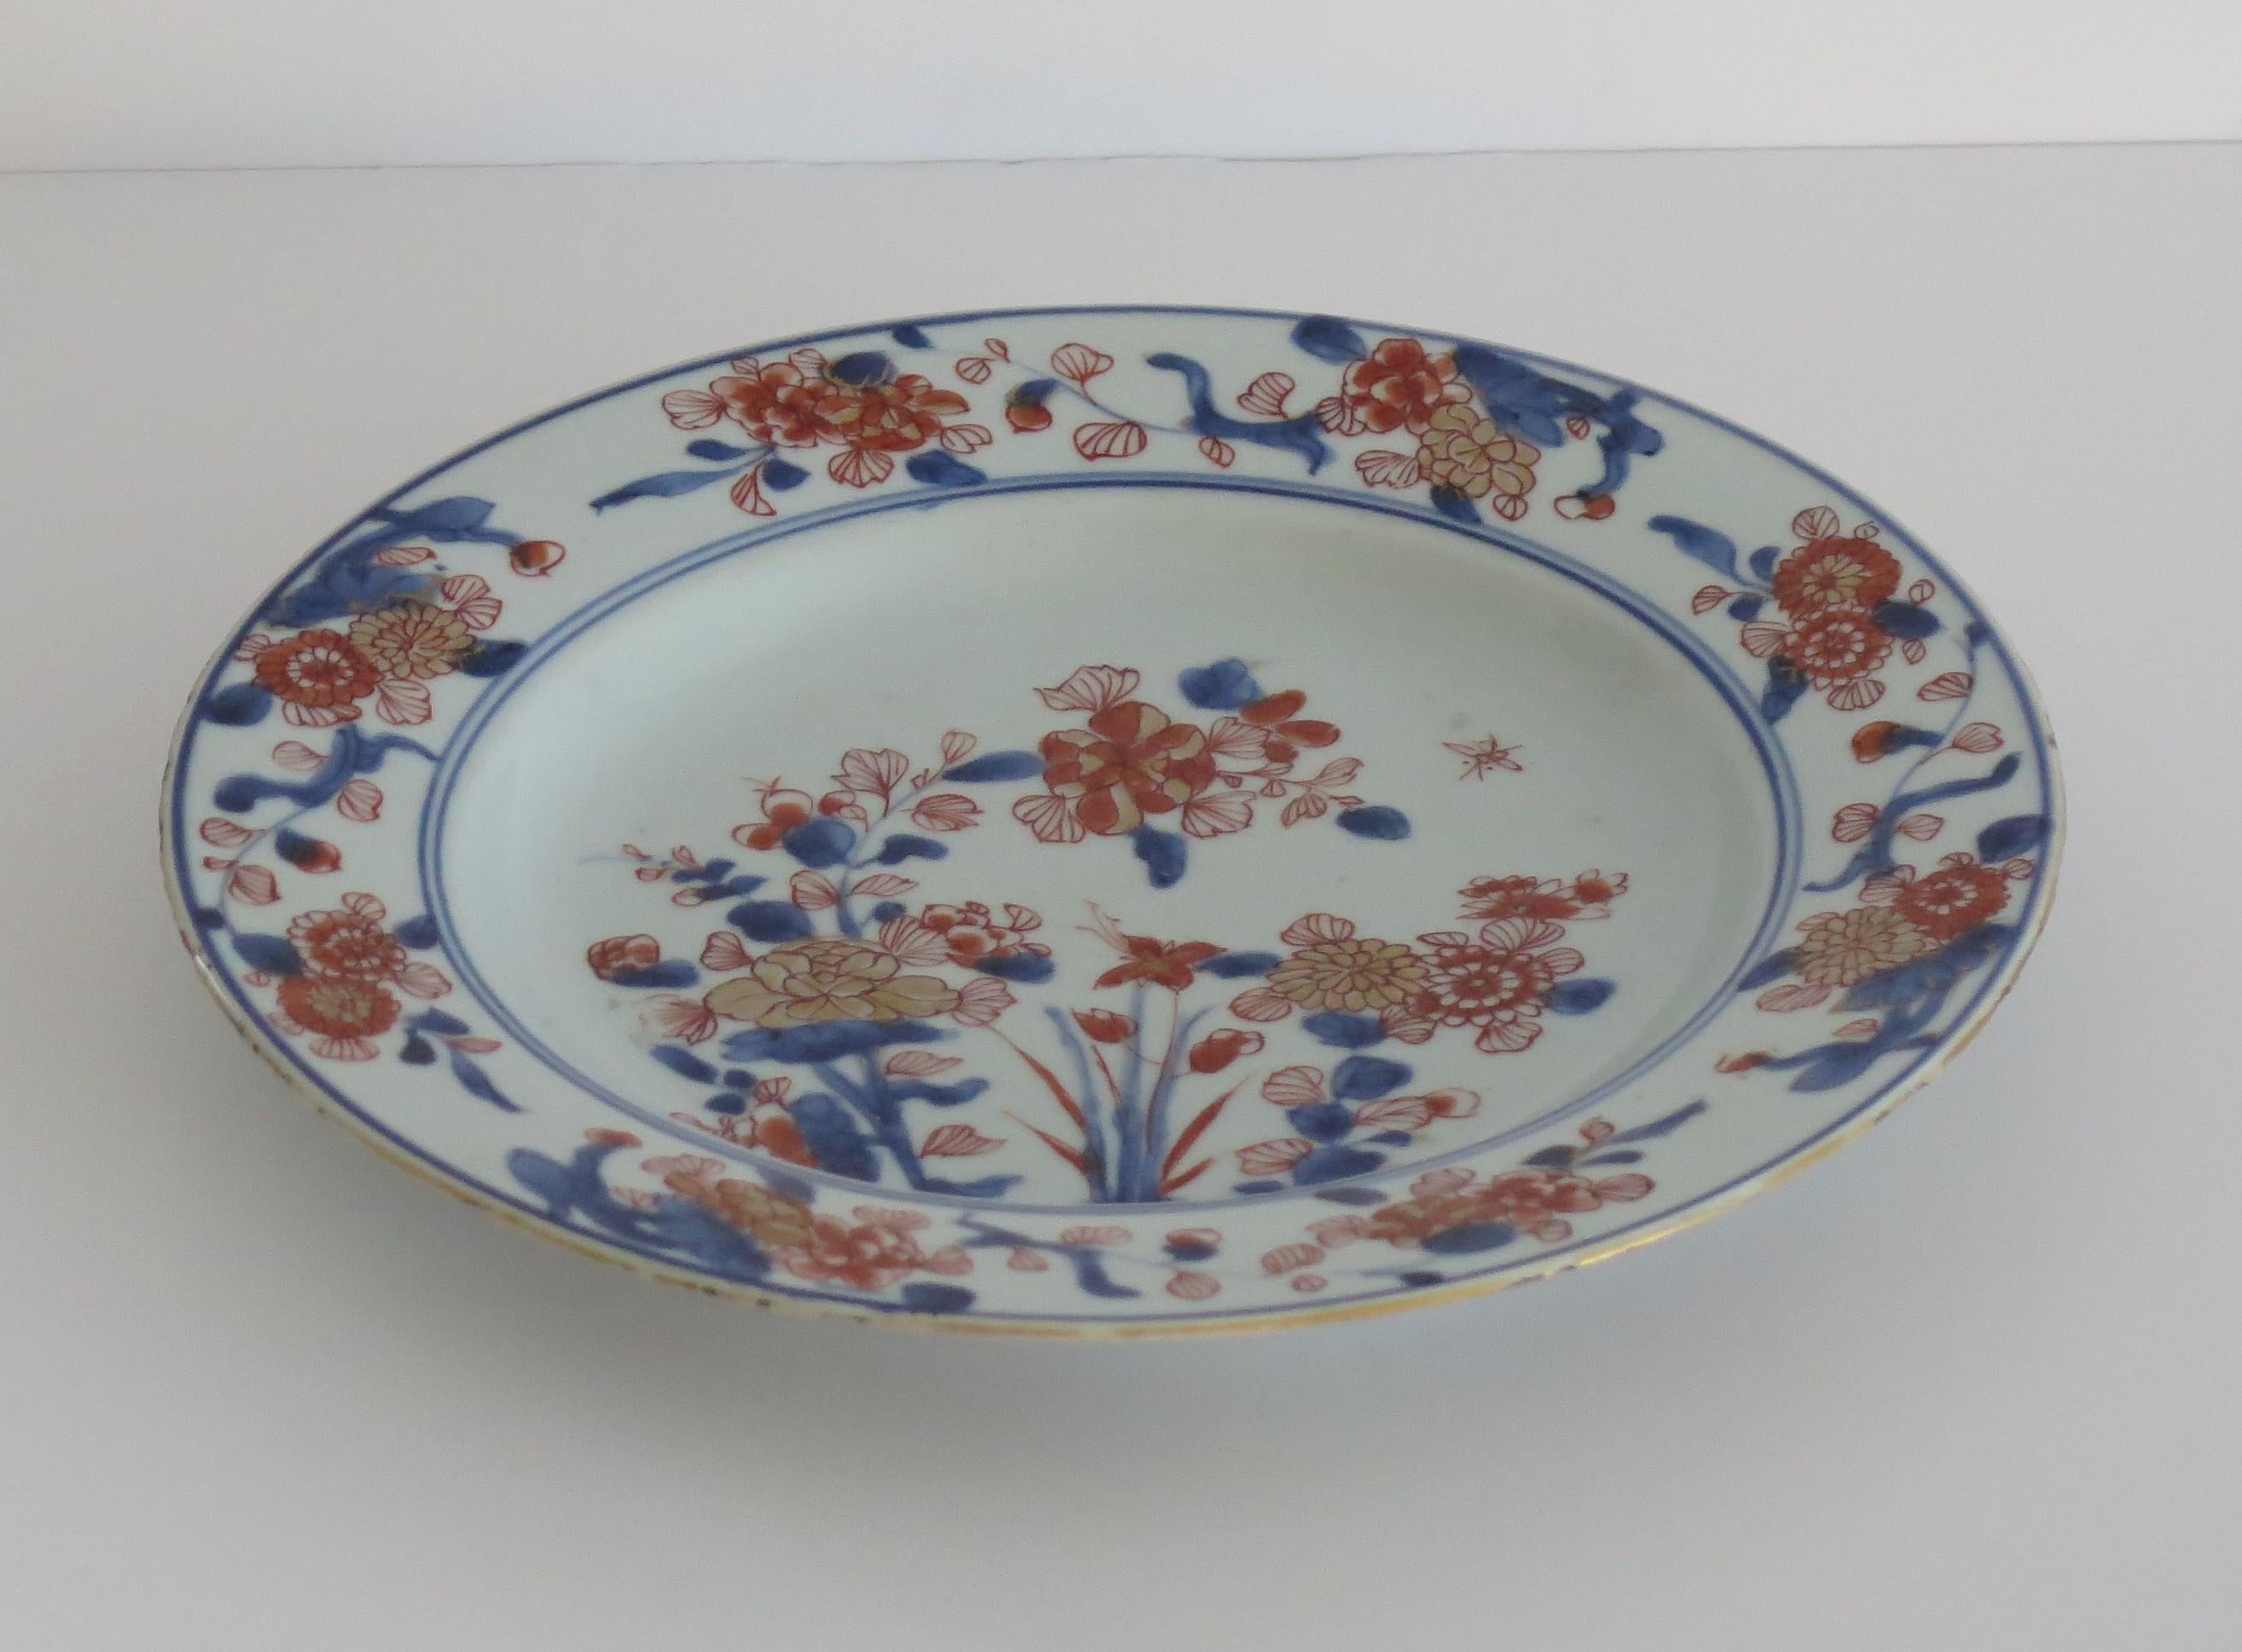 18th Century Chinese Imari Porcelain Plate or Bowl Qing Kangxi Mark and period, Ca 1700 For Sale